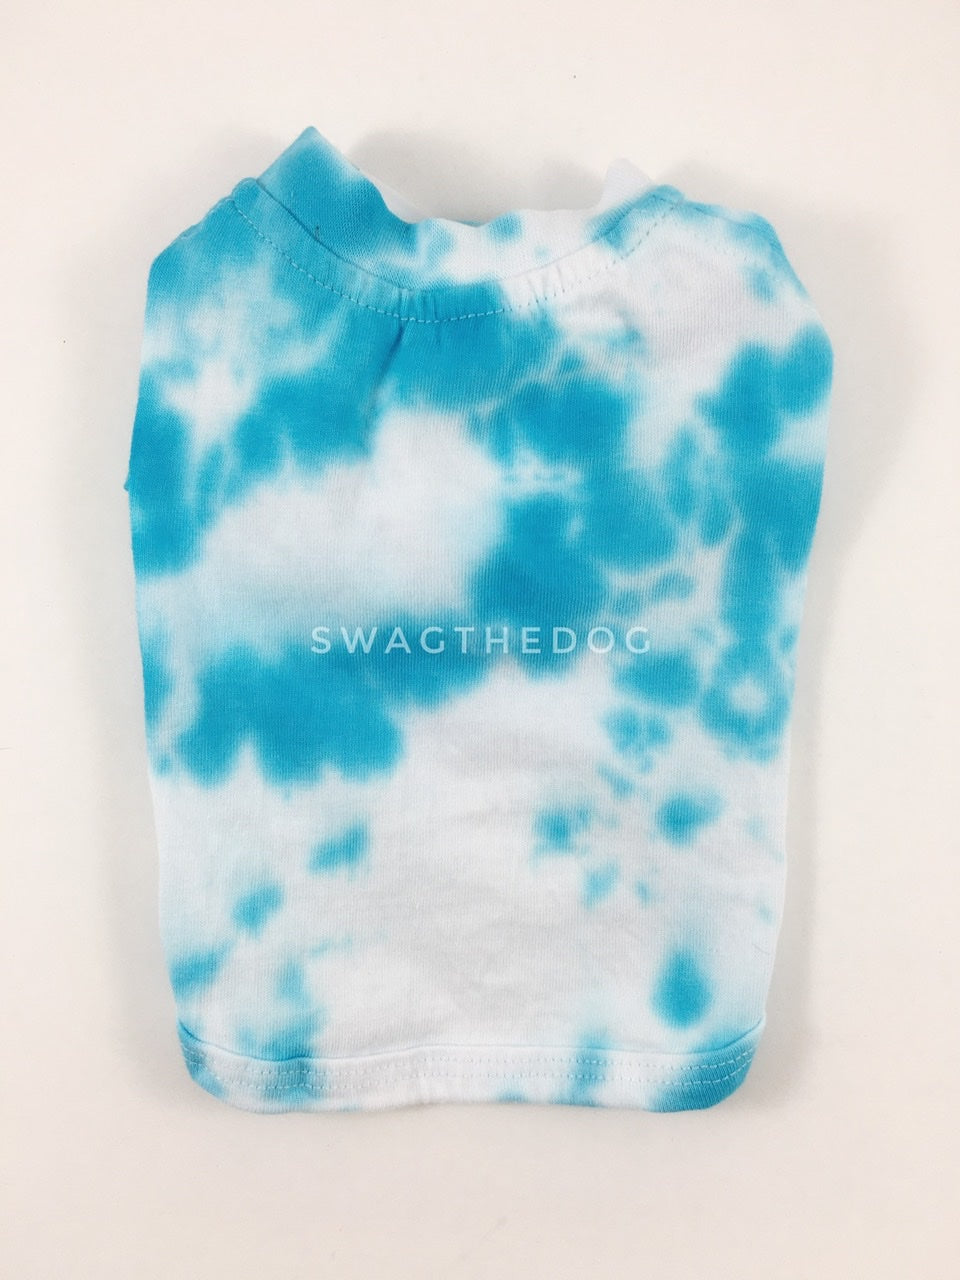 Swagadelic Sky Blue Tie Dye Tee - Product back view. The hand tie-dyed tee with Sky Blue